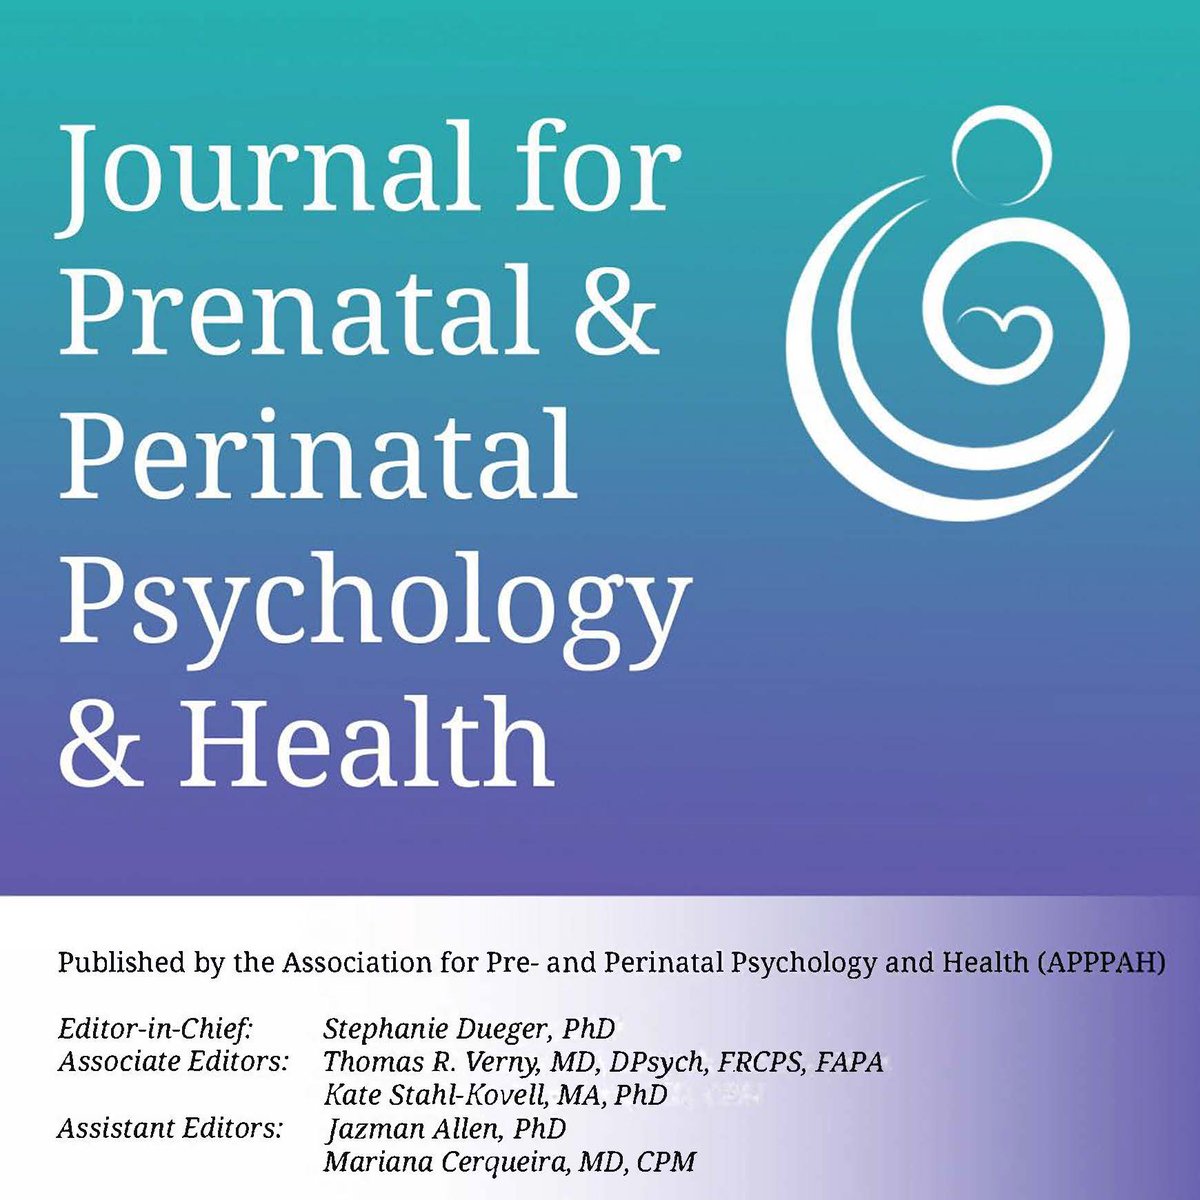 This #MaternalMentalHealthWeek Mersey Care staff are reminded that they have access to the Journal for Prenatal & Perinatal Psychology & Health. Go to browzine.com/libraries/2907… selecting Mersey Care as your library if prompted